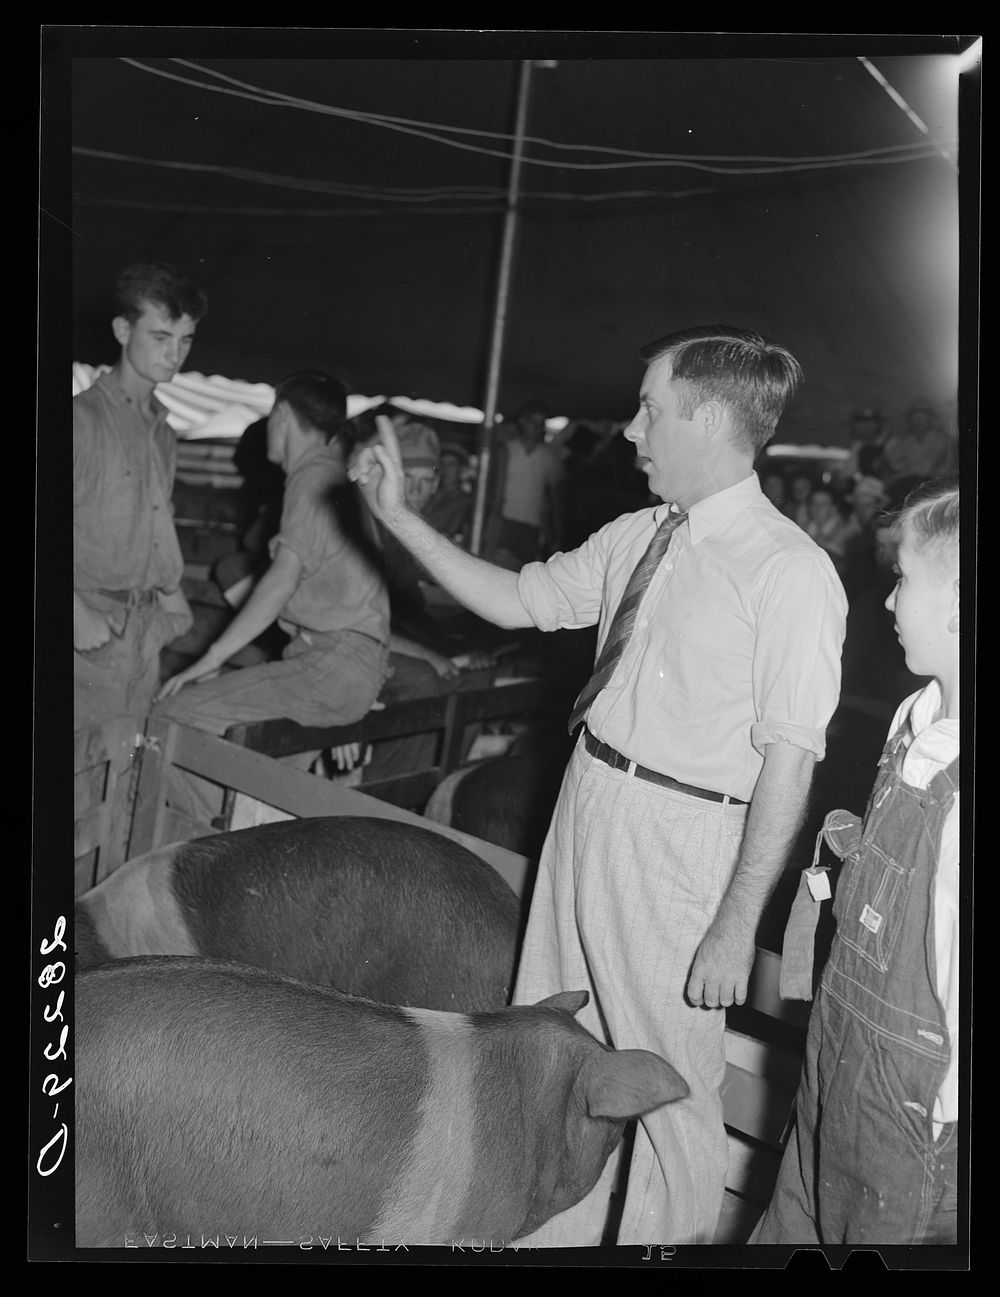 Auctioneer at hog sale. Central Iowa Fair, Marshalltown, Iowa. Sourced from the Library of Congress.